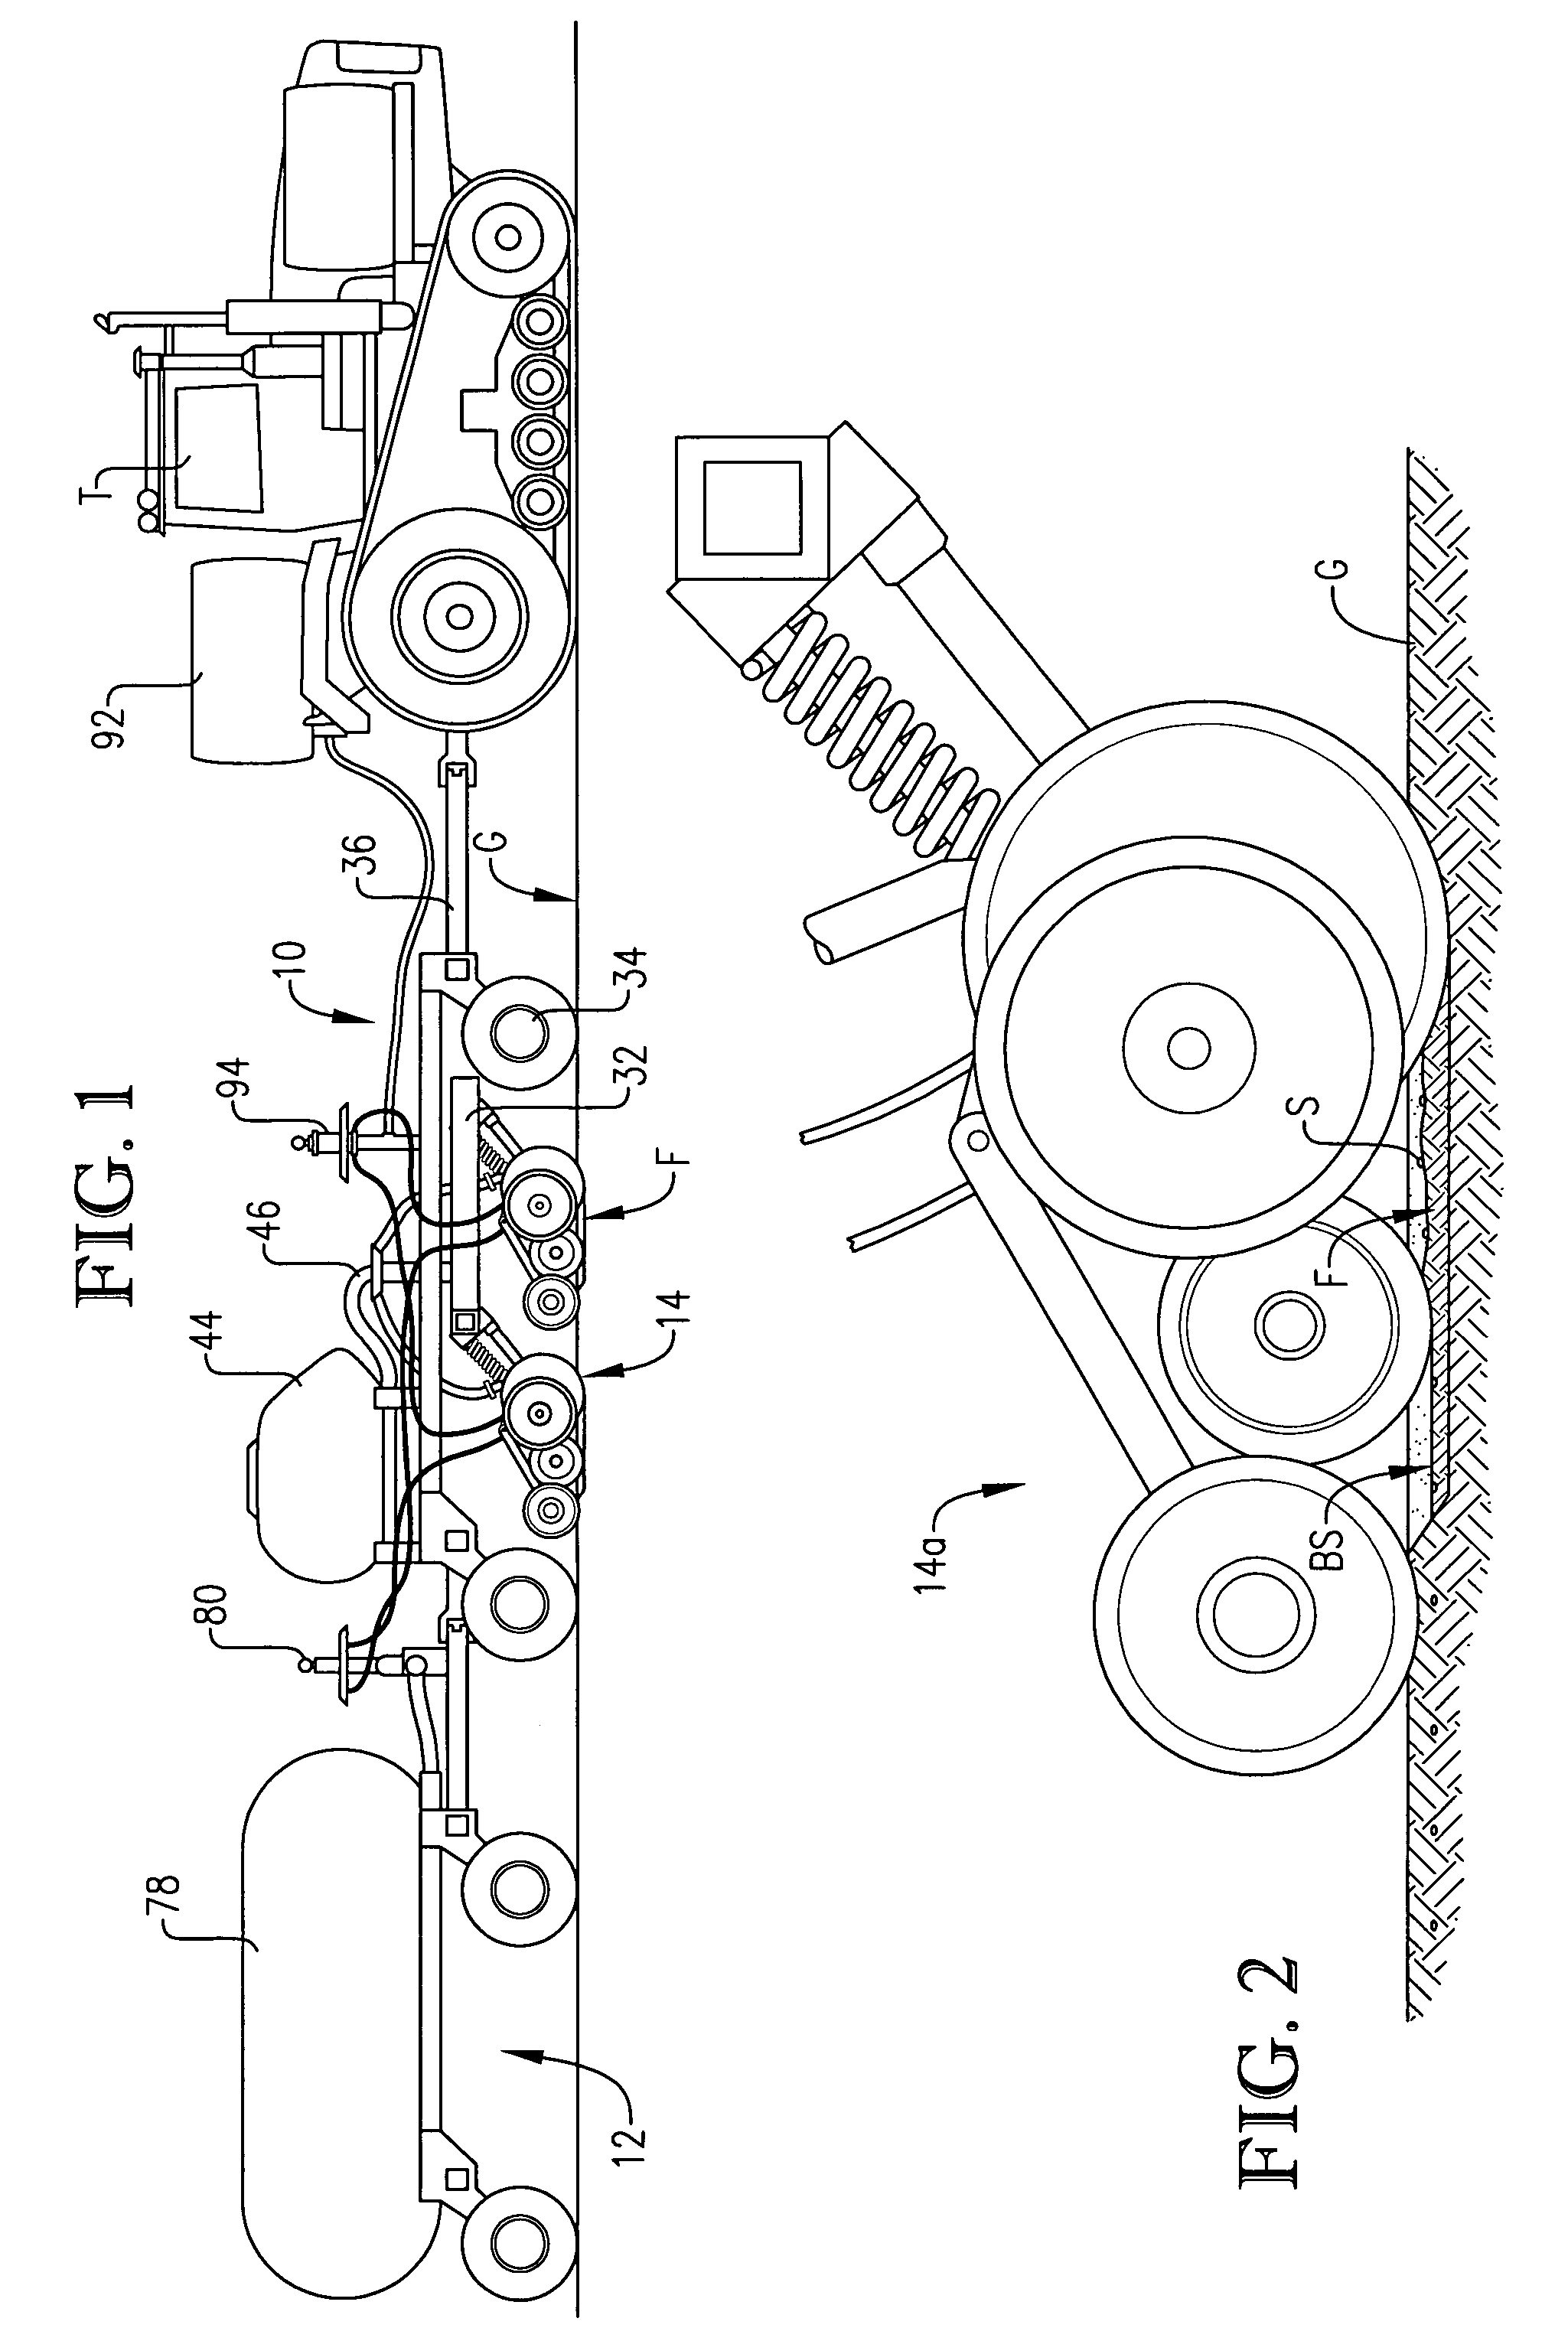 Fertilizer injector wing for disc openers